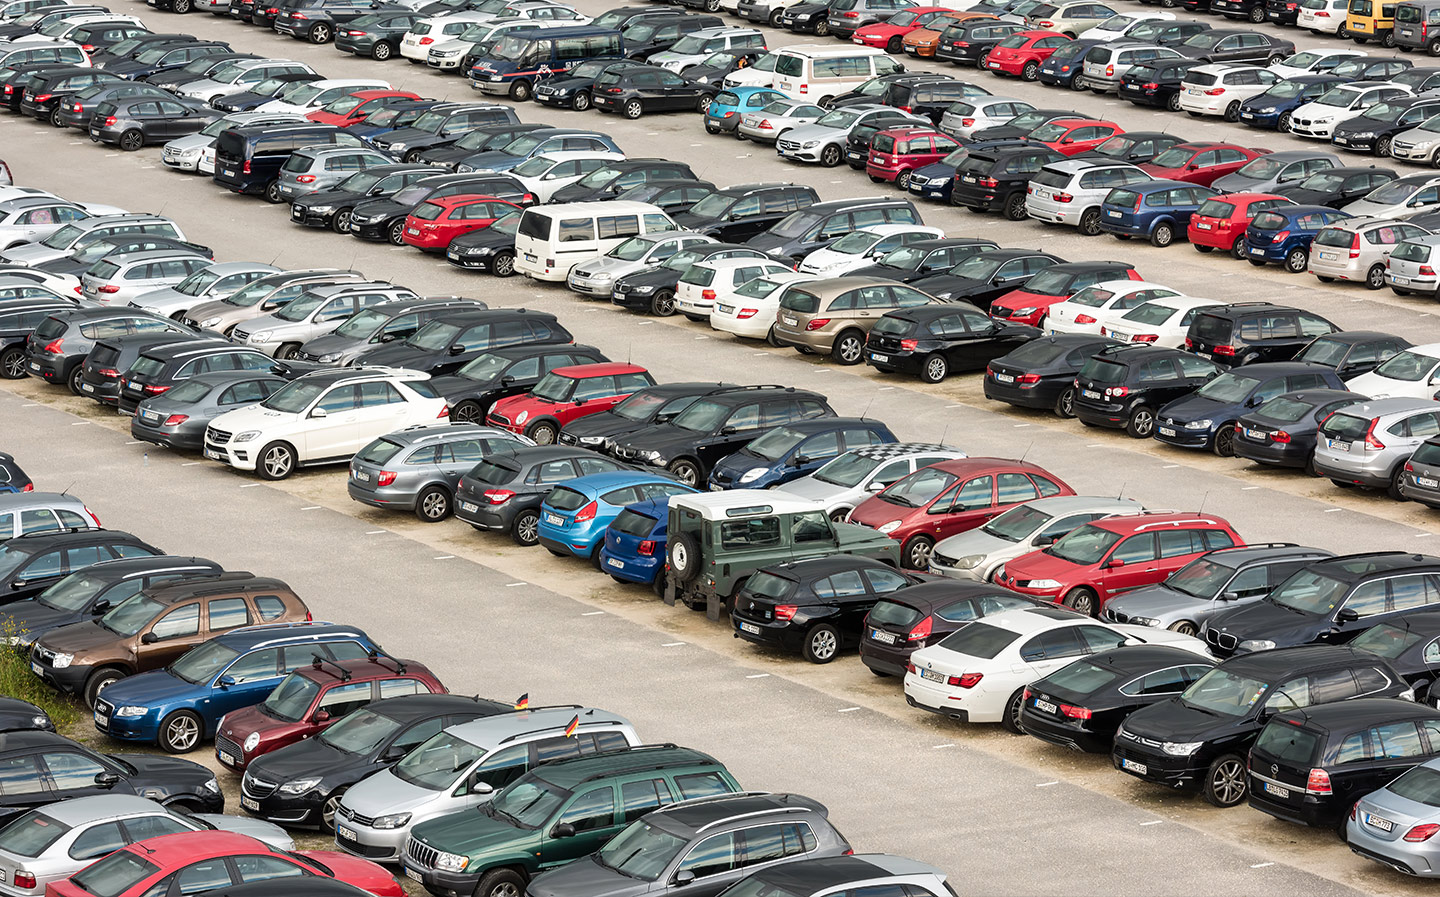 Car Clinic: My car was damaged by airport parking — what can I do?